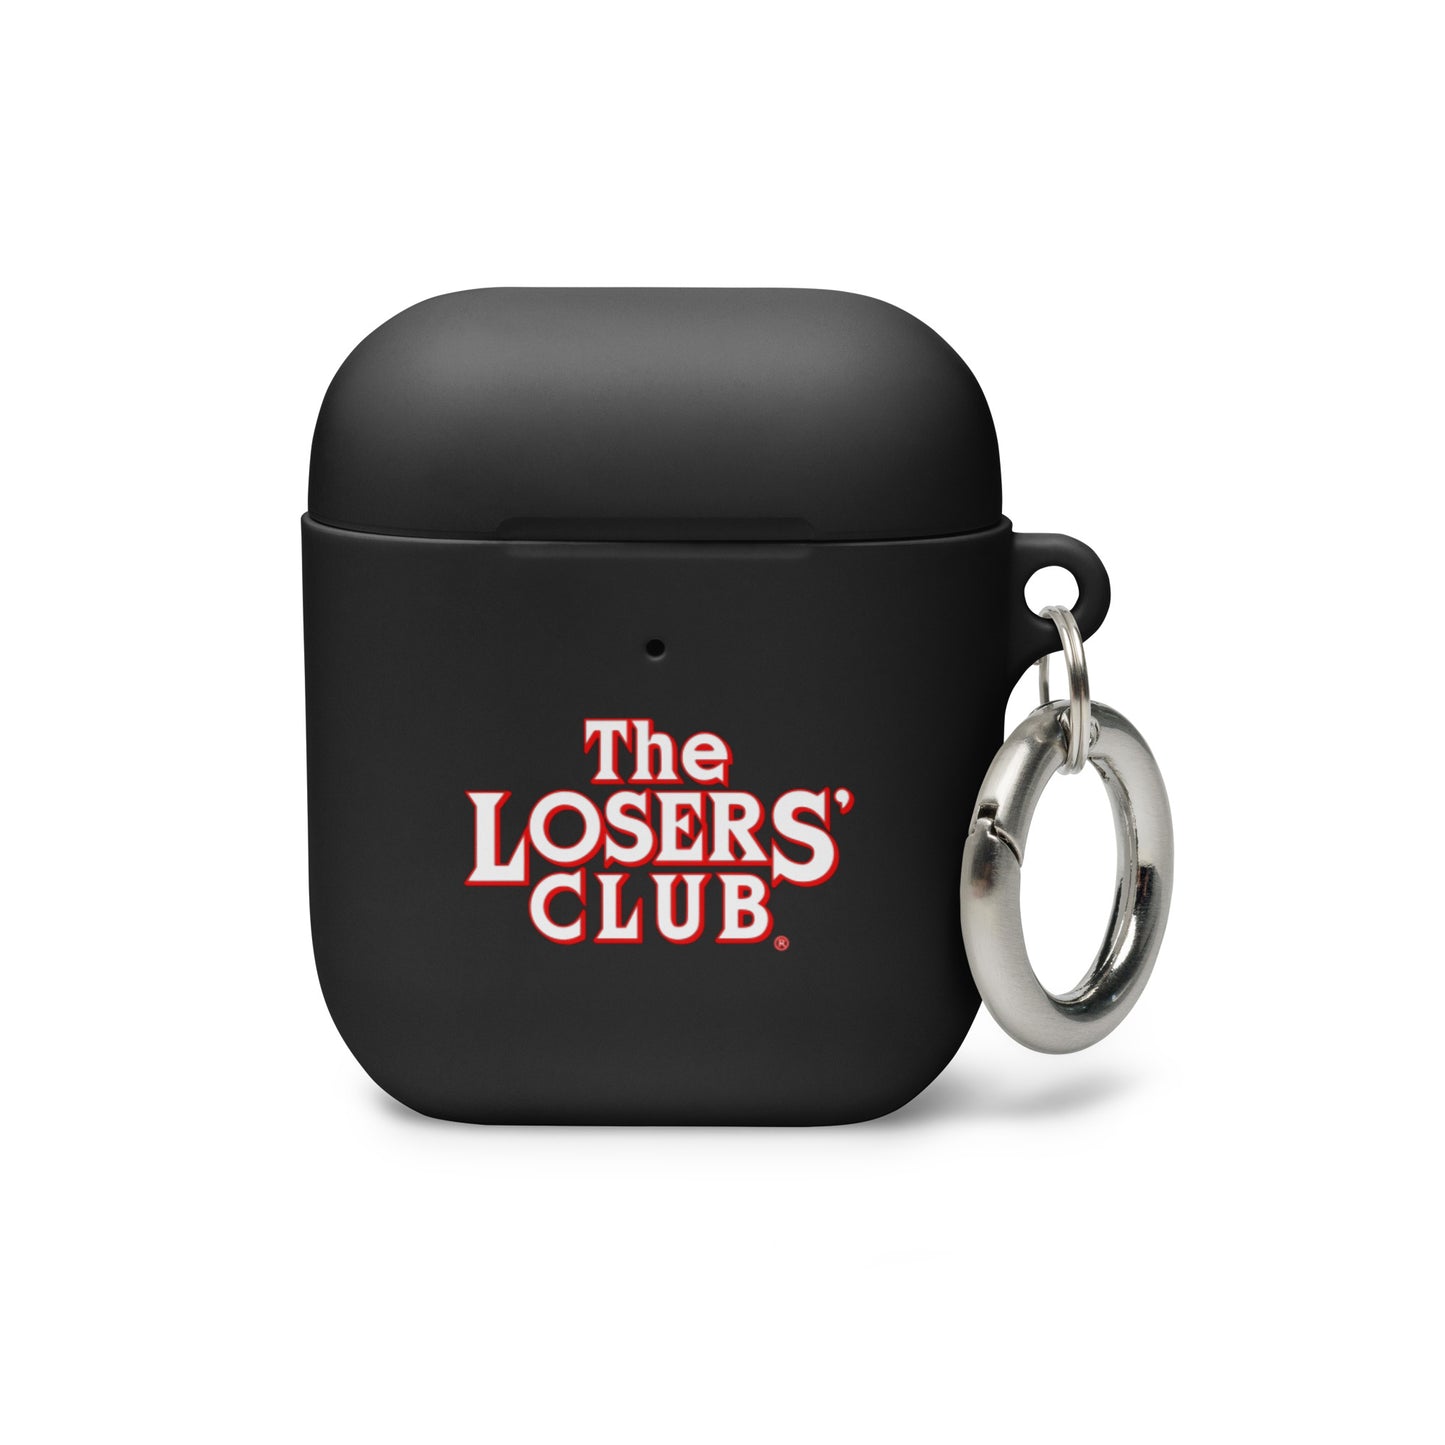 The Losers' Club AirPod Case